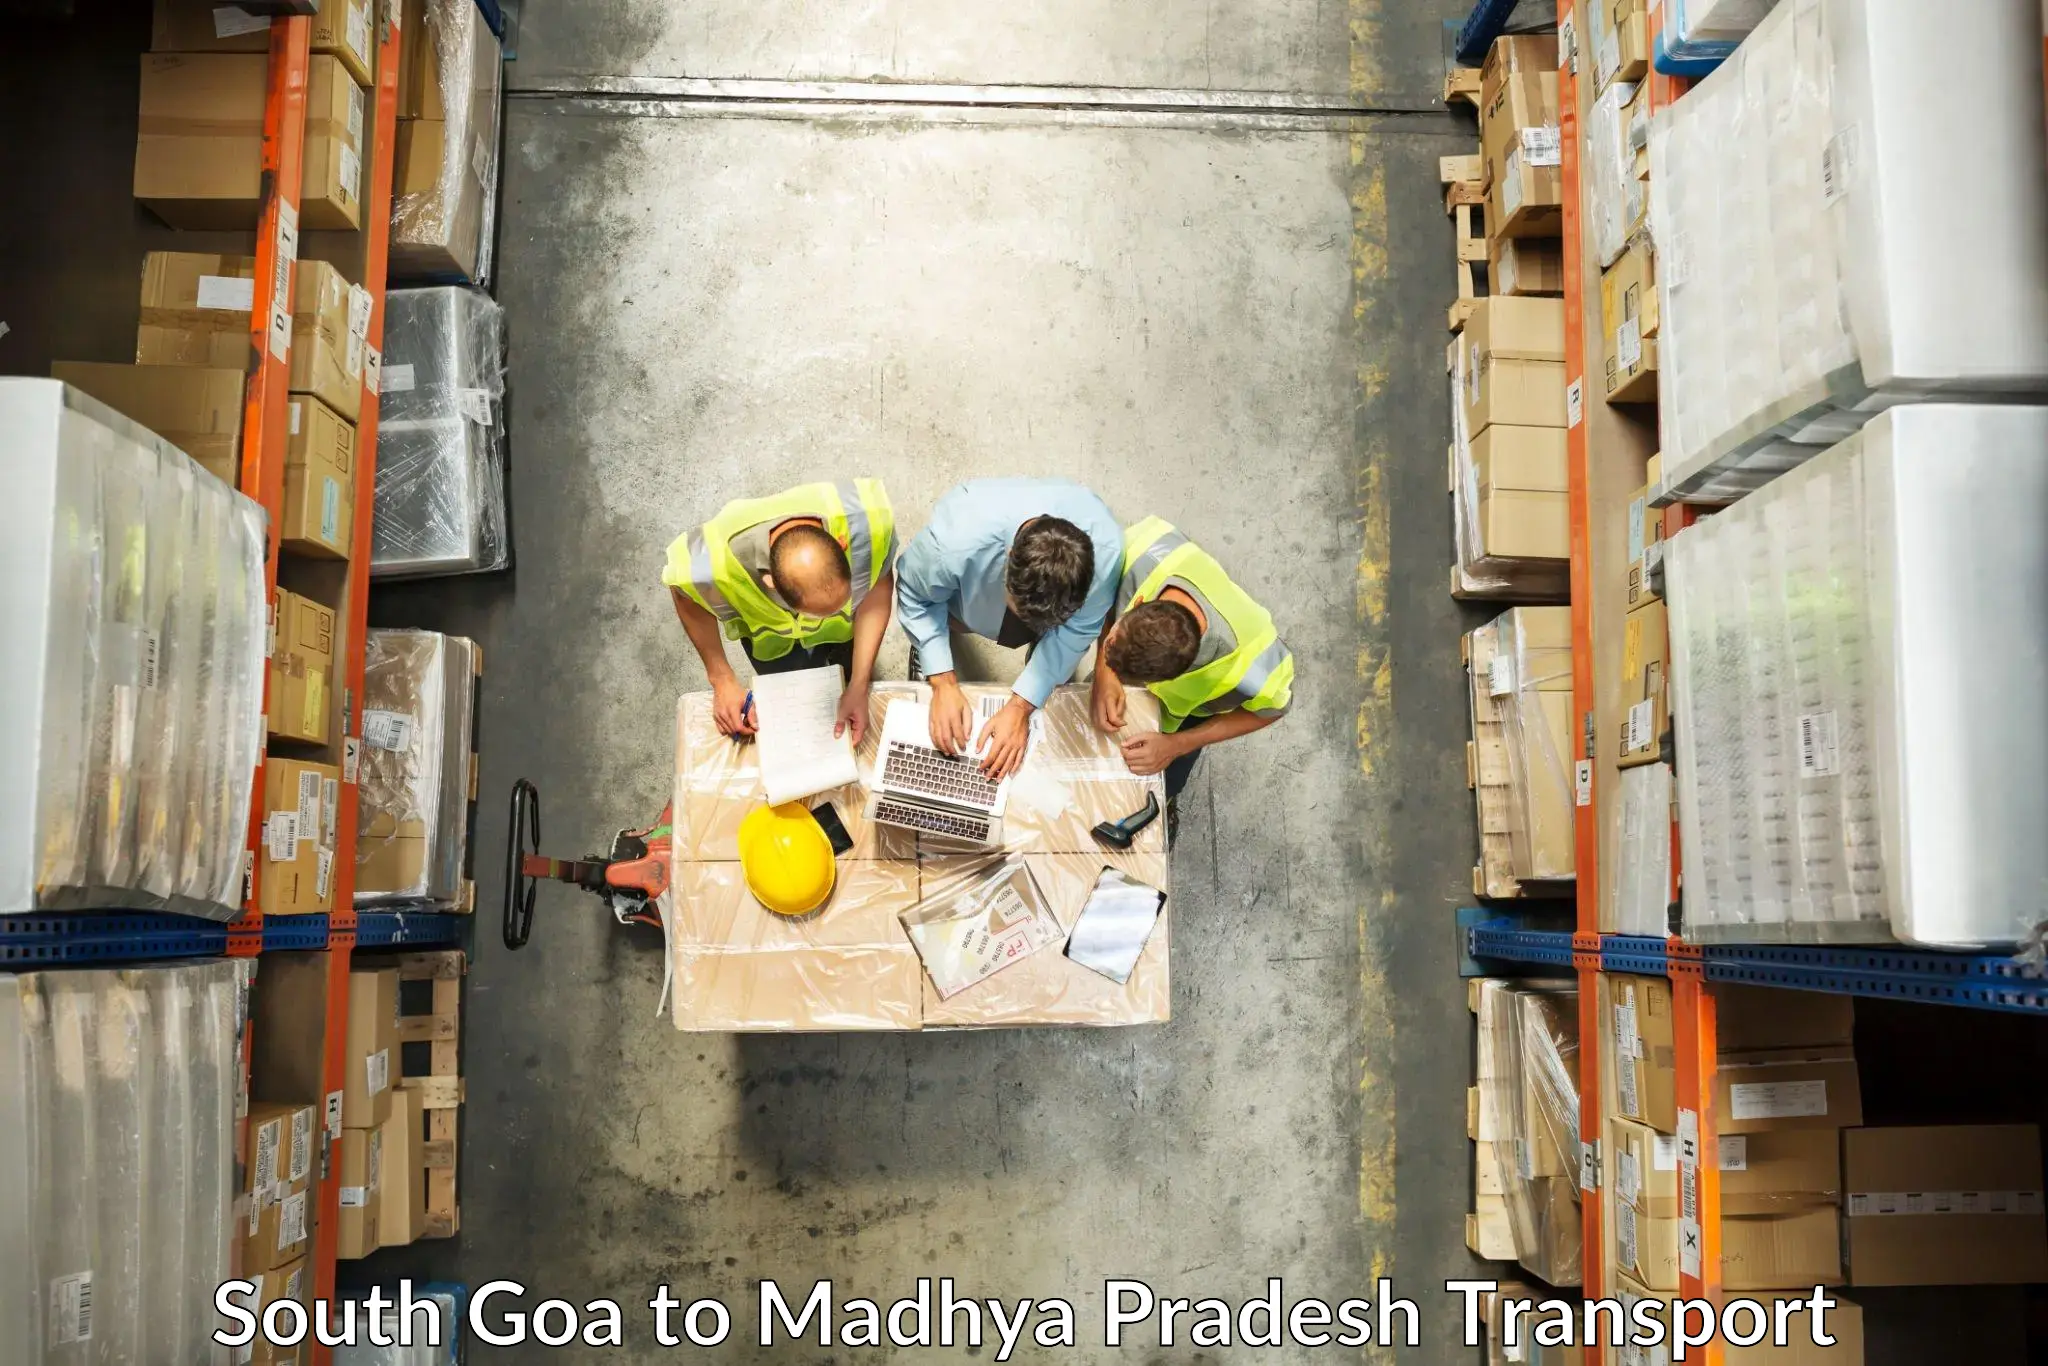 Material transport services South Goa to Mandideep